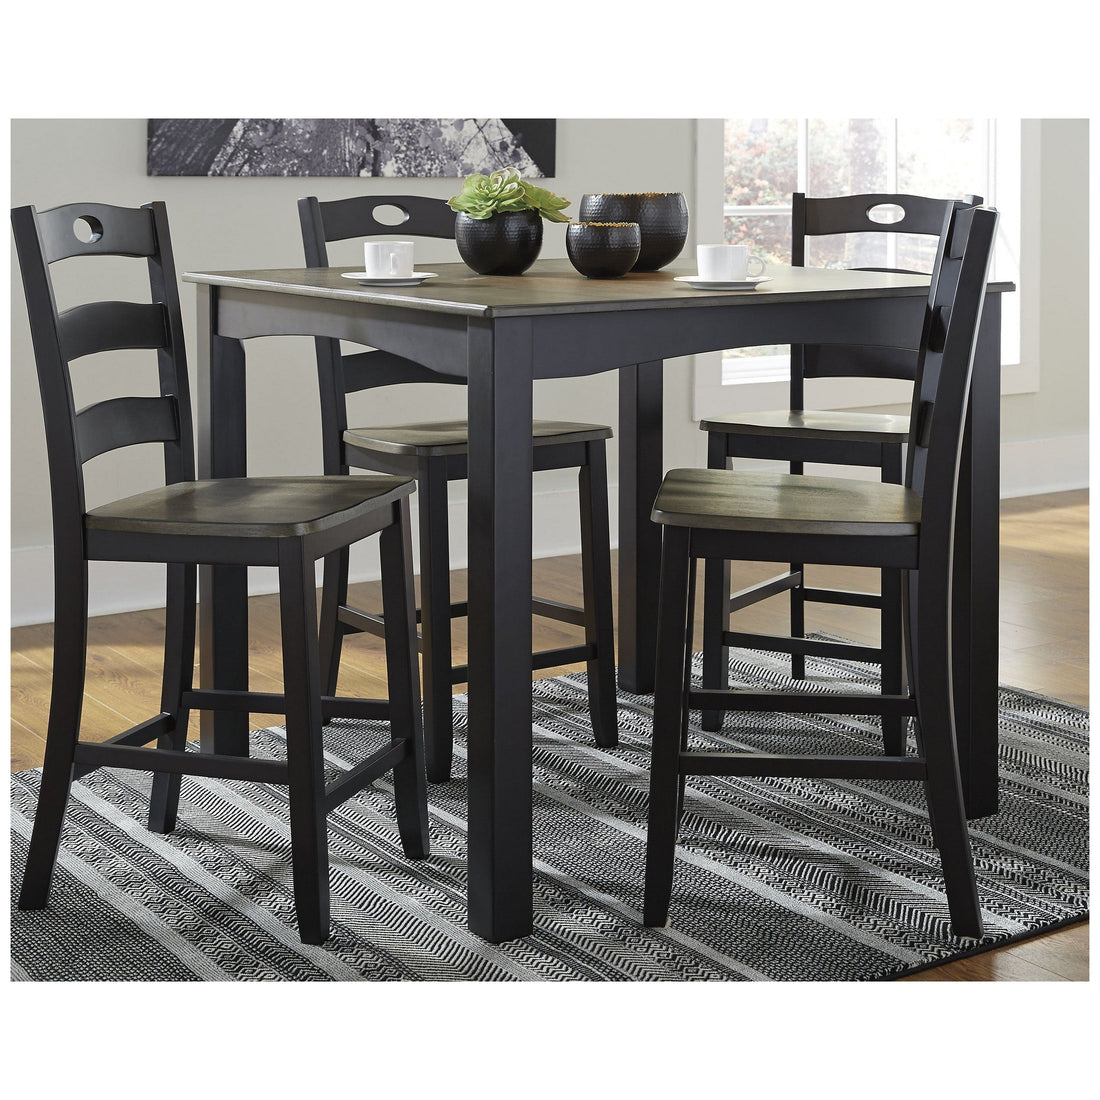 Froshburg Counter Height Dining Table and Bar Stools (Set of 5) Ash-D338-223